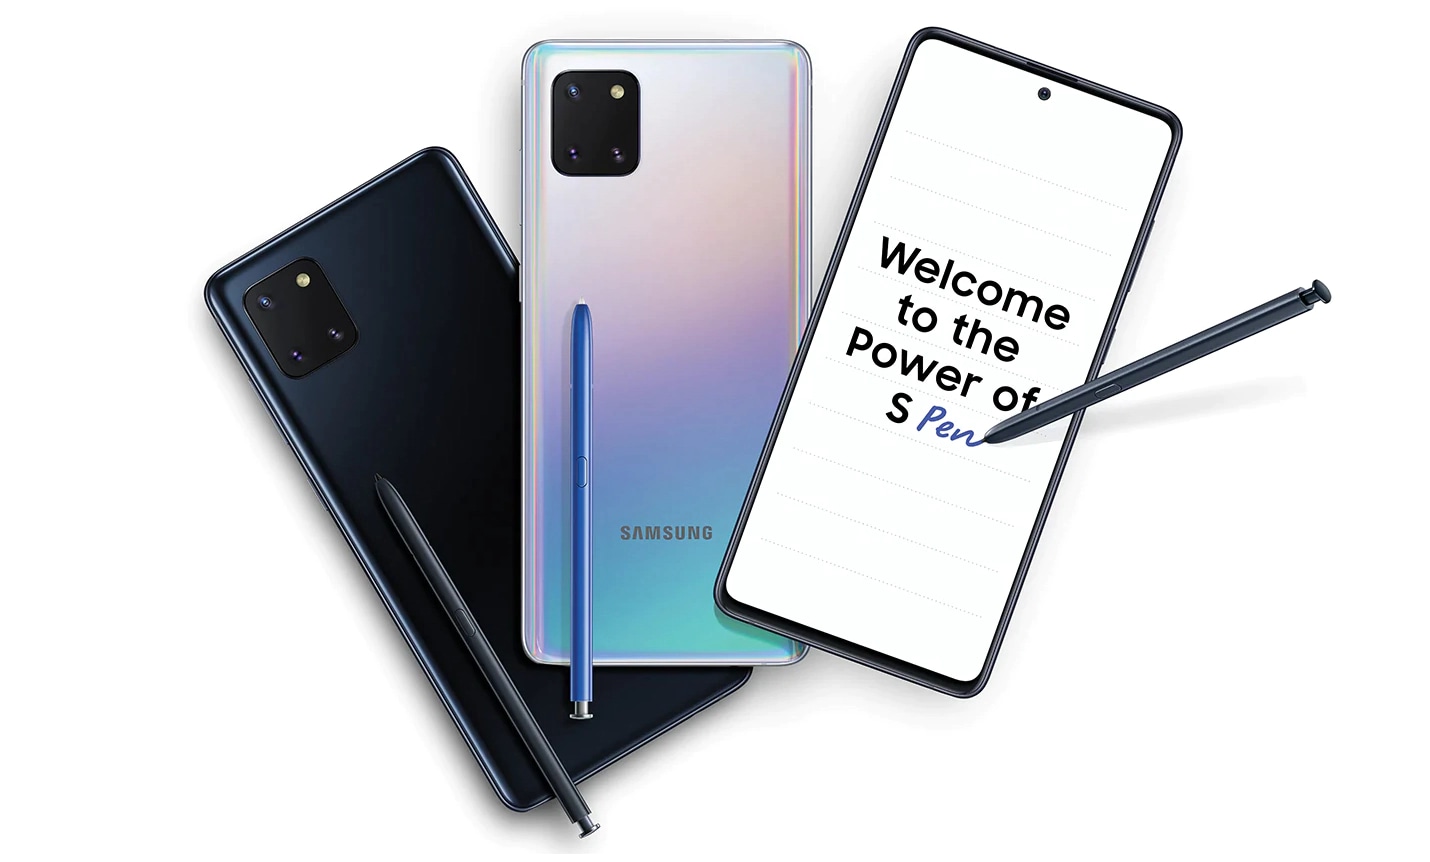 Samsung Galaxy Note 10 Lite - Just as good as the Note 10 Plus? 